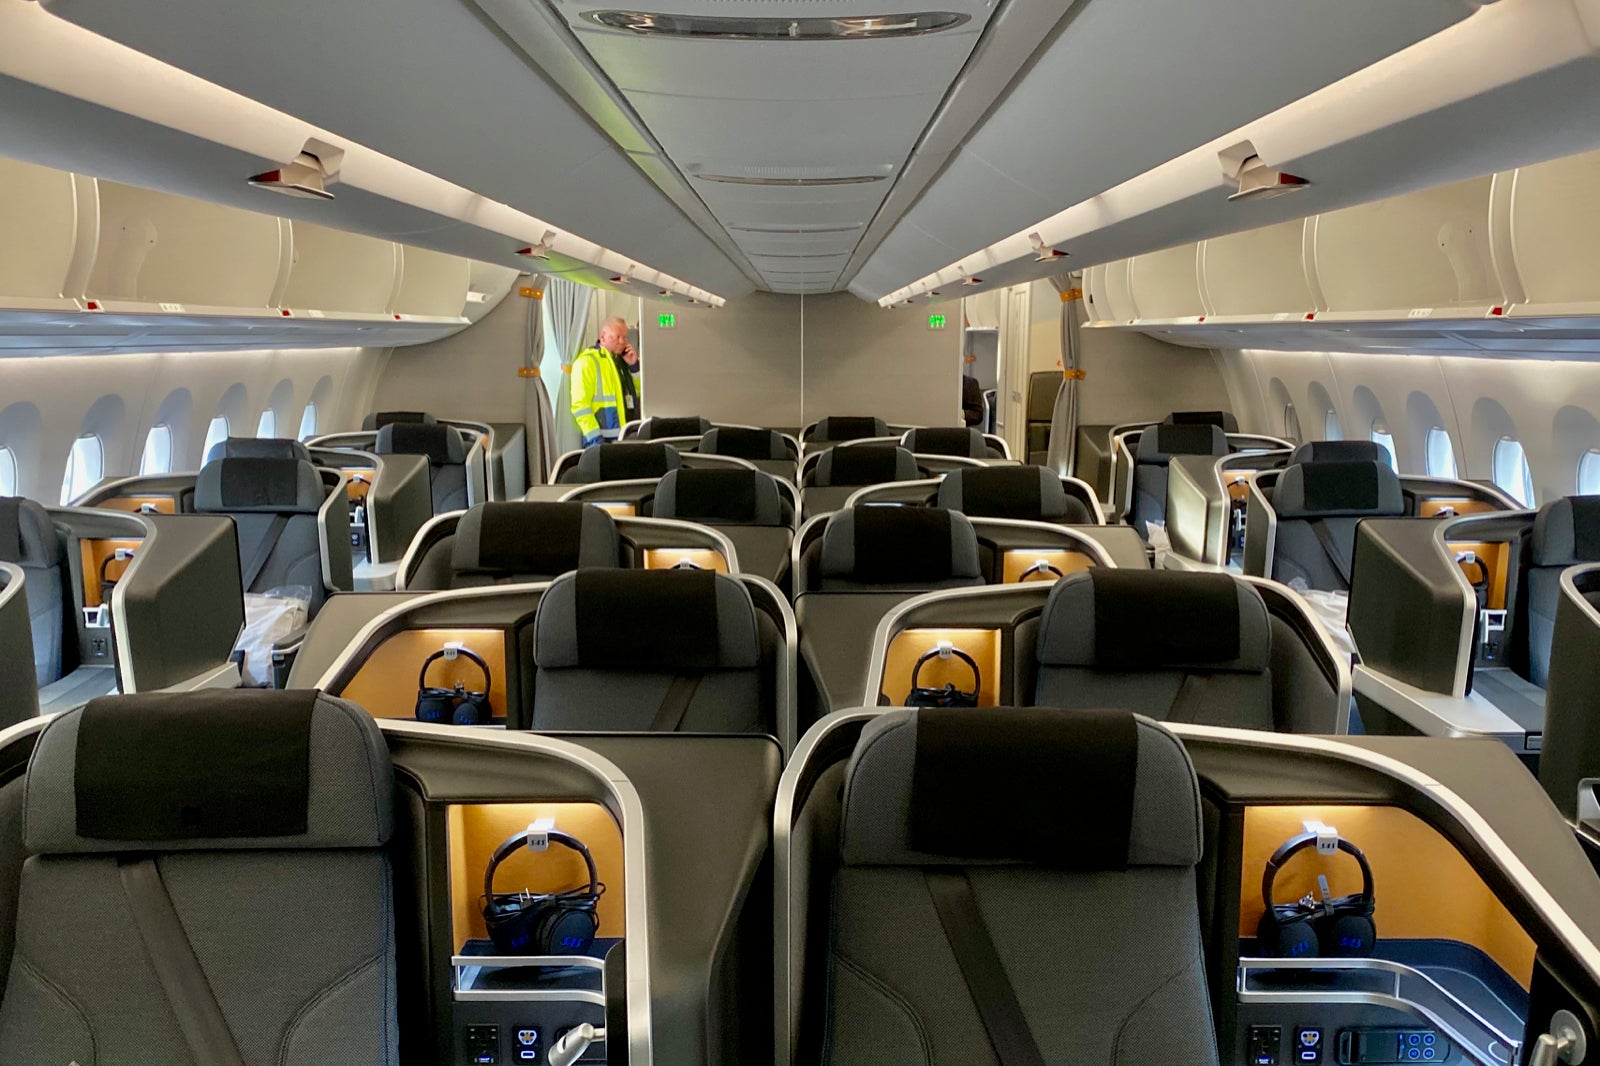 A nice improvement: review of SAS business class on the new Airbus A350 The Guy